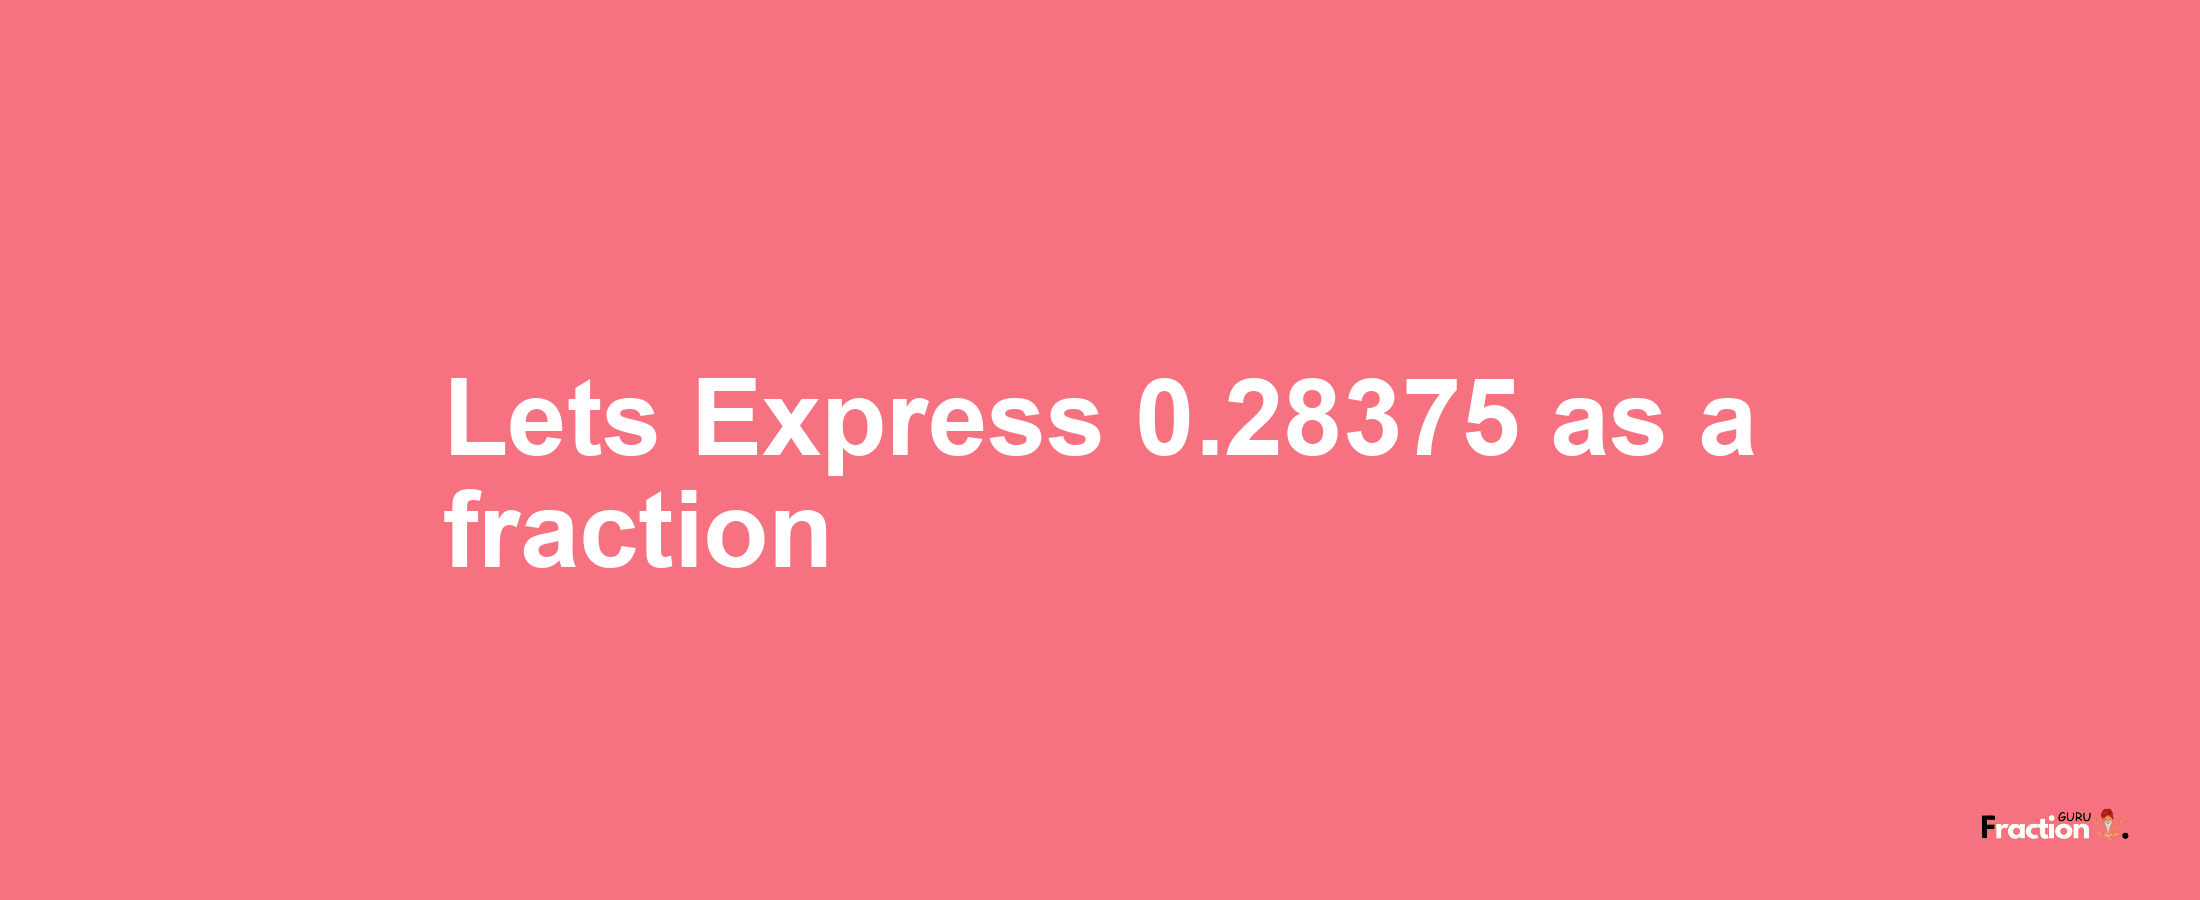 Lets Express 0.28375 as afraction